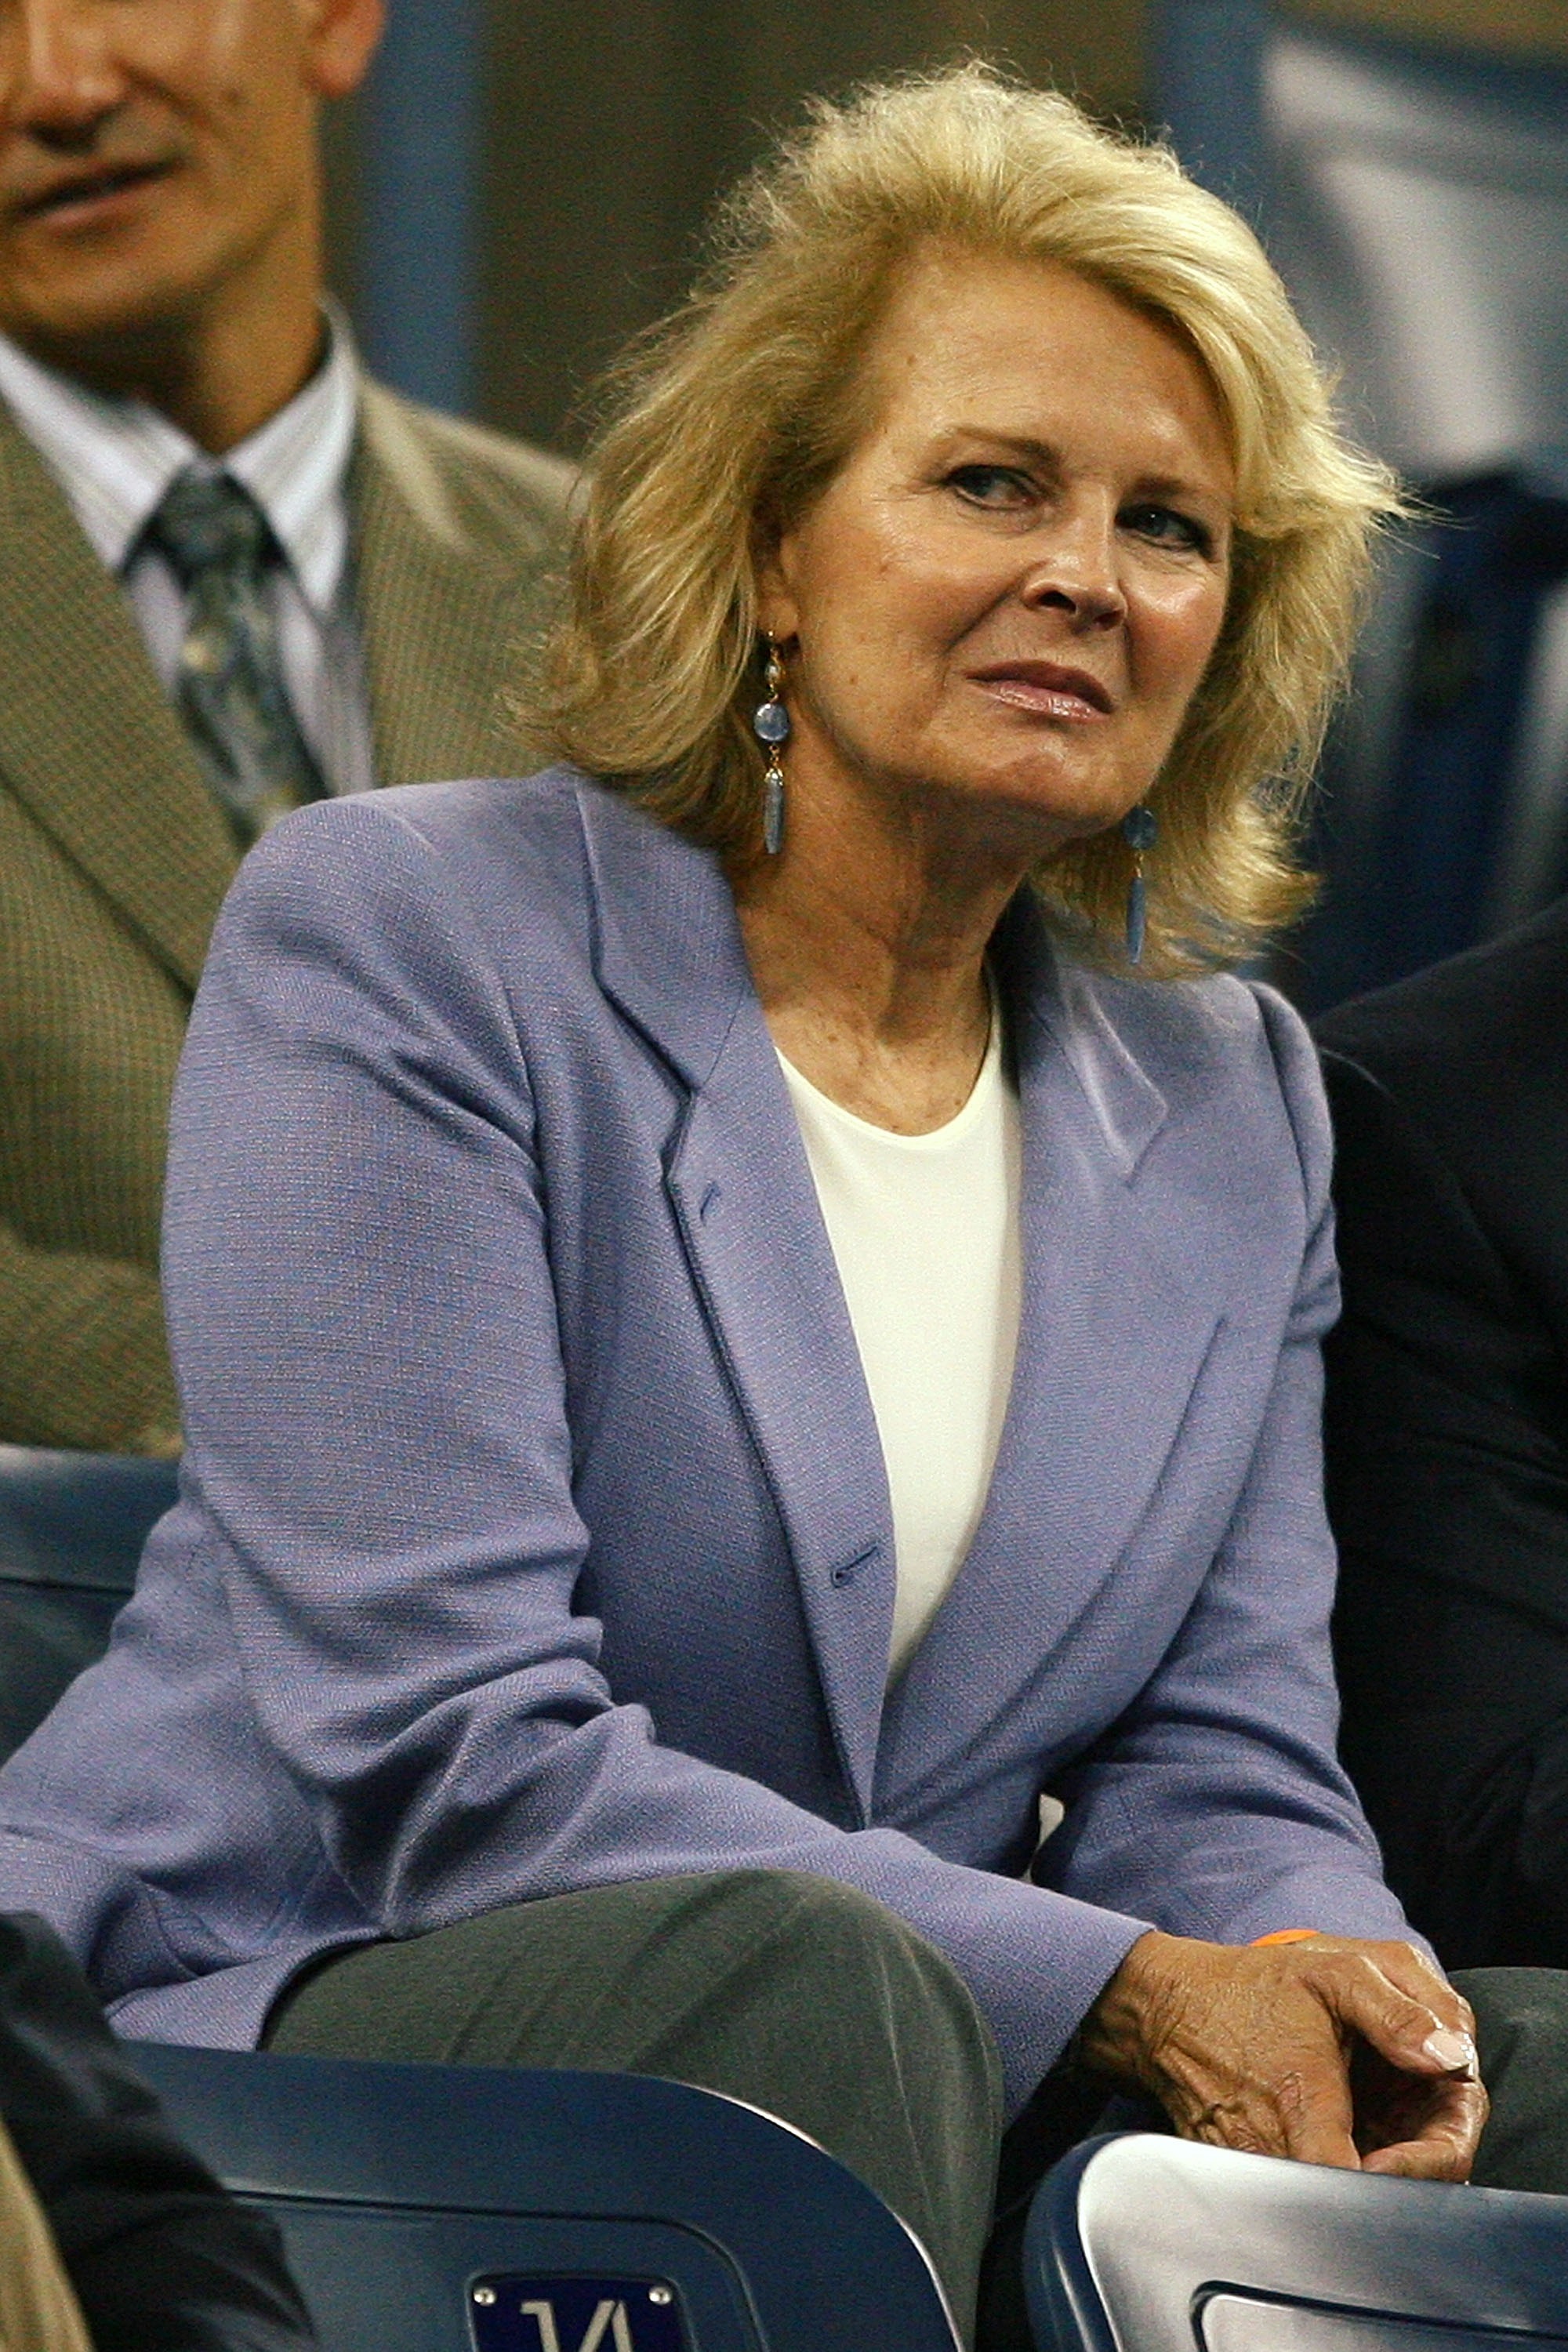 Candice Bergen during the U.S. Open at the Billie Jean King National Tennis Center on September 6, 2007 | Source: Getty Images